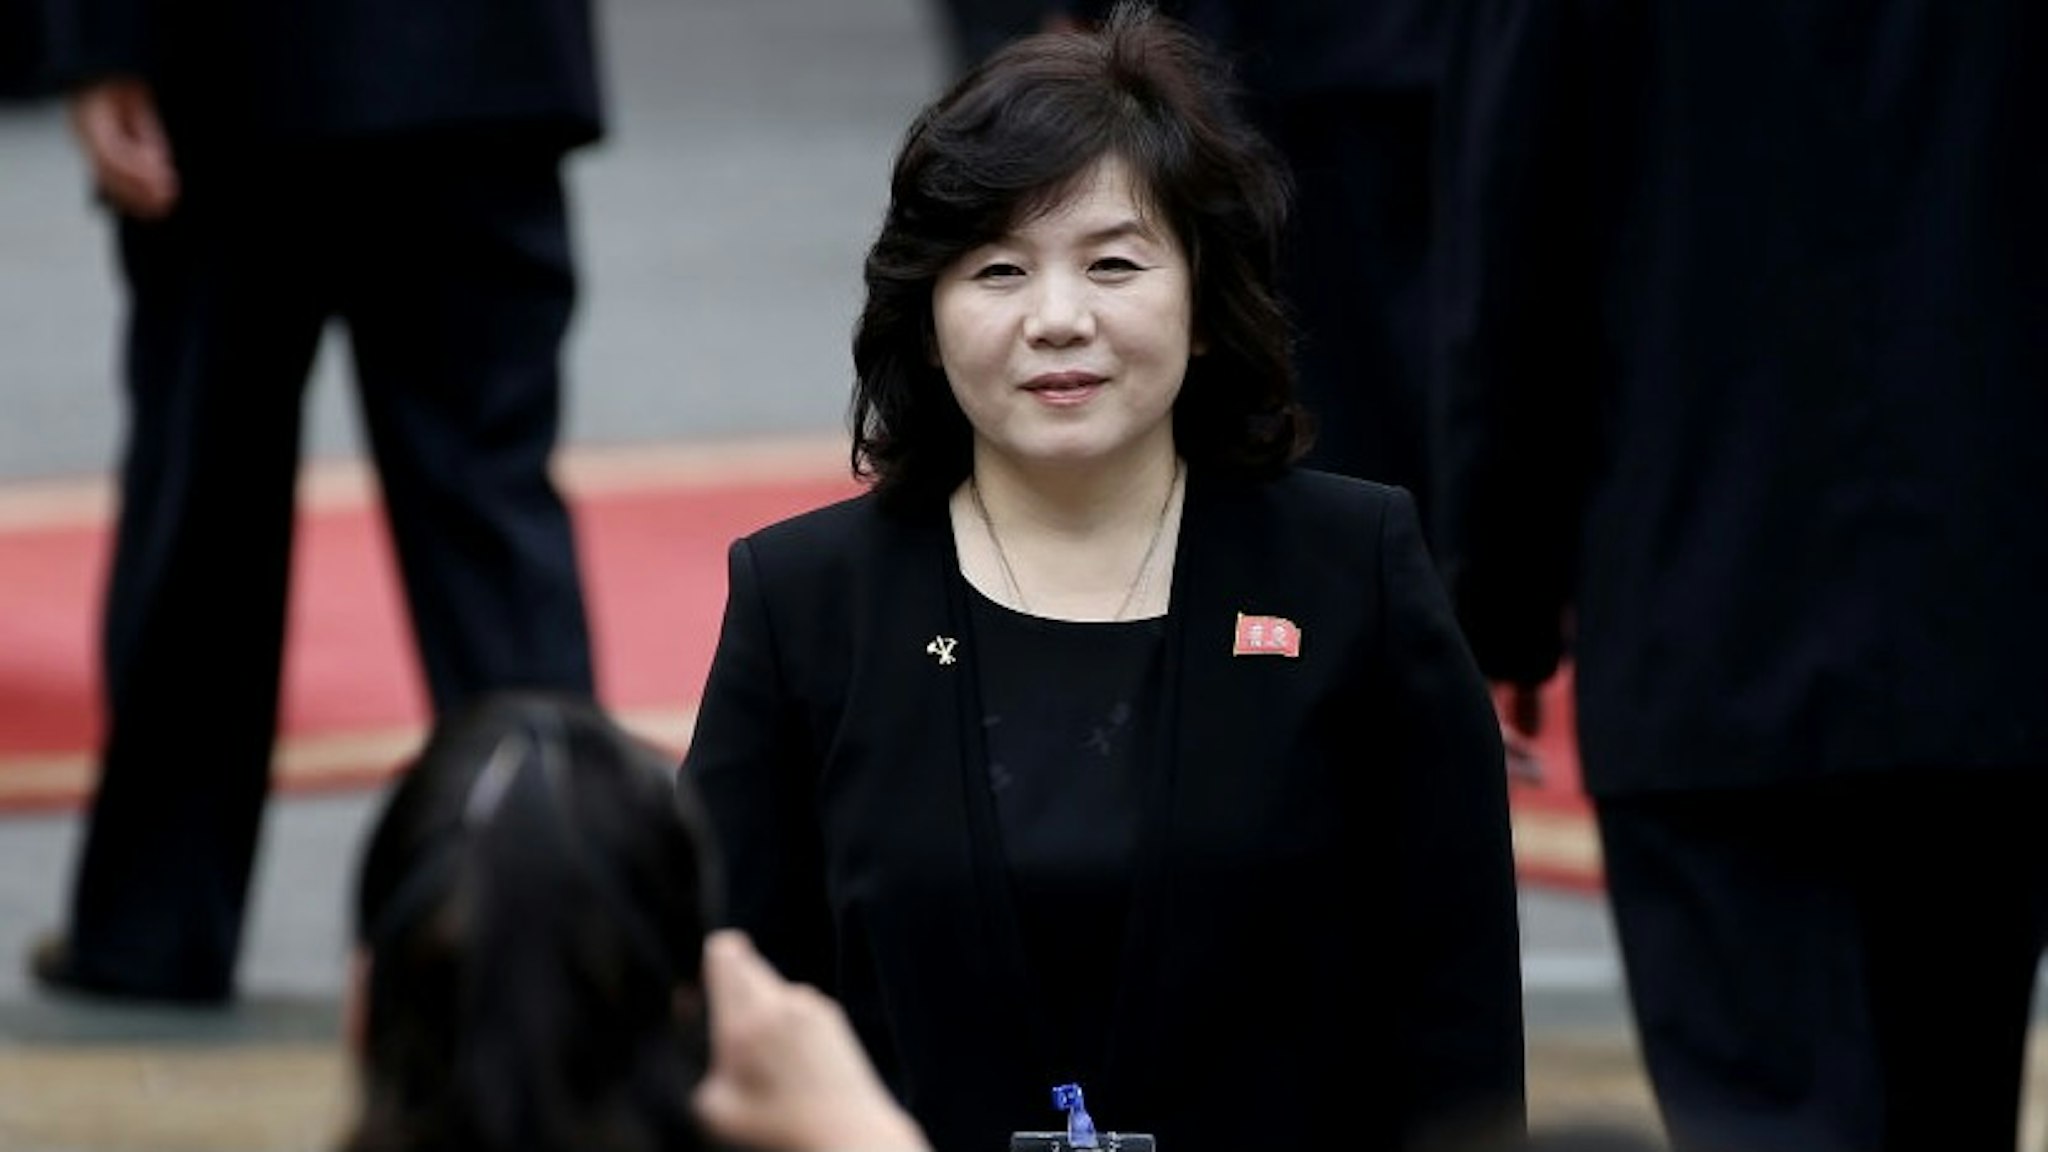 Choe Son Hui, North Korea's vice foreign minister, poses for a photograph ahead of a welcoming ceremony at the Presidential Palace in Hanoi, Vietnam, on Friday, March 1, 2019. Kim will have a long train ride home through China to think about what went wrong in his second summit with Donald Trump and how to keep it from reversing his gains of the past year. Photographer: Luong Thai Linh/Pool via Bloomberg